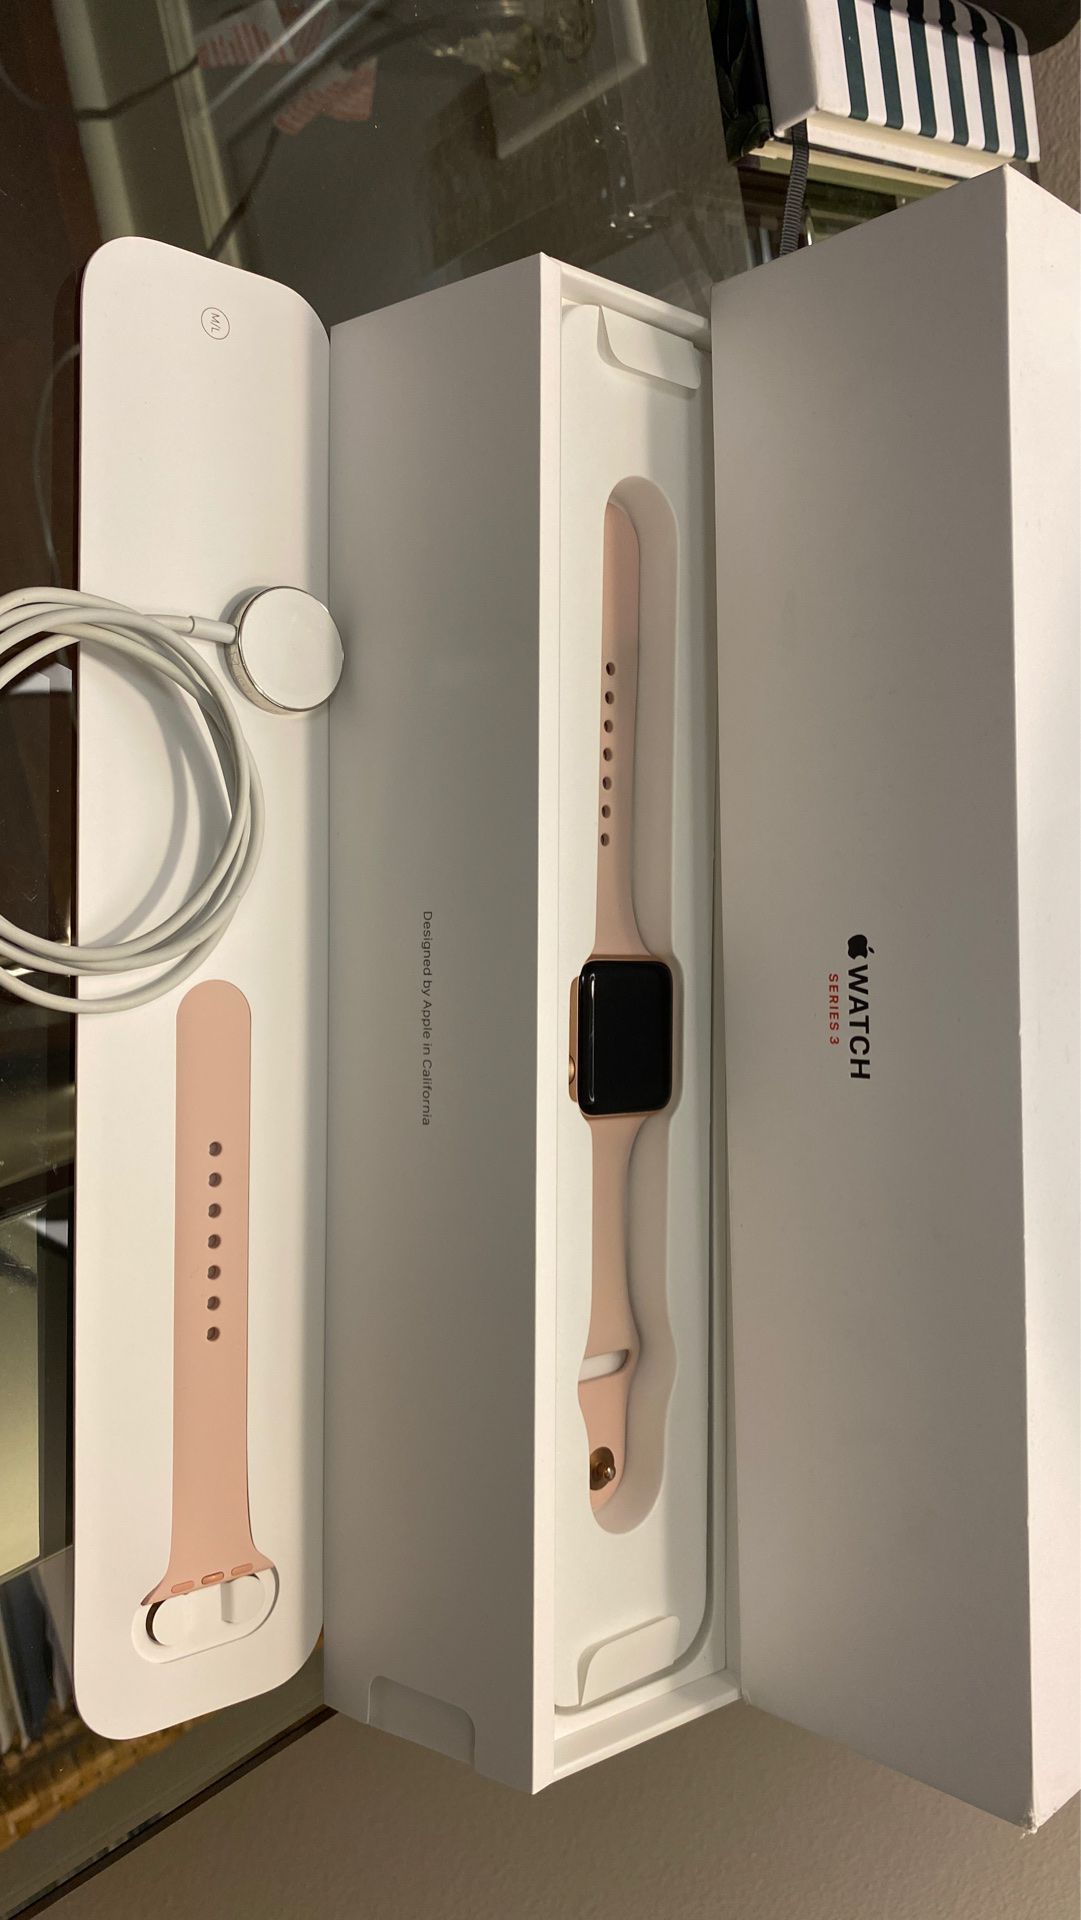 Apple Watch 38MM 3 Series - Rose Gold - Size Small